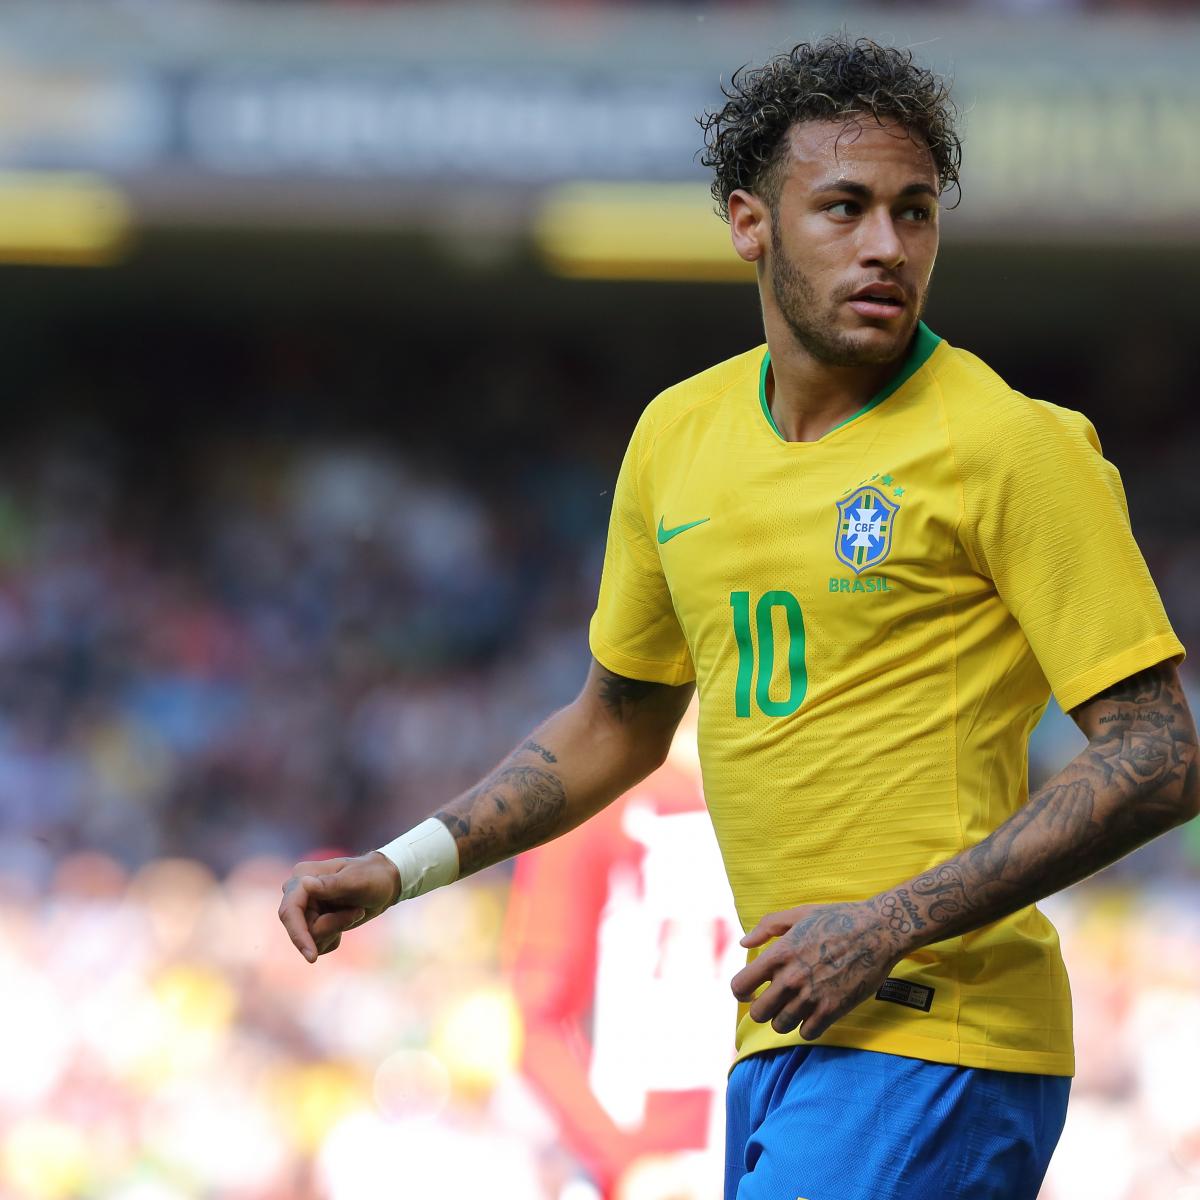 'I'm 80 Per Cent,' Says Neymar After Scoring for Brazil in Comeback ...